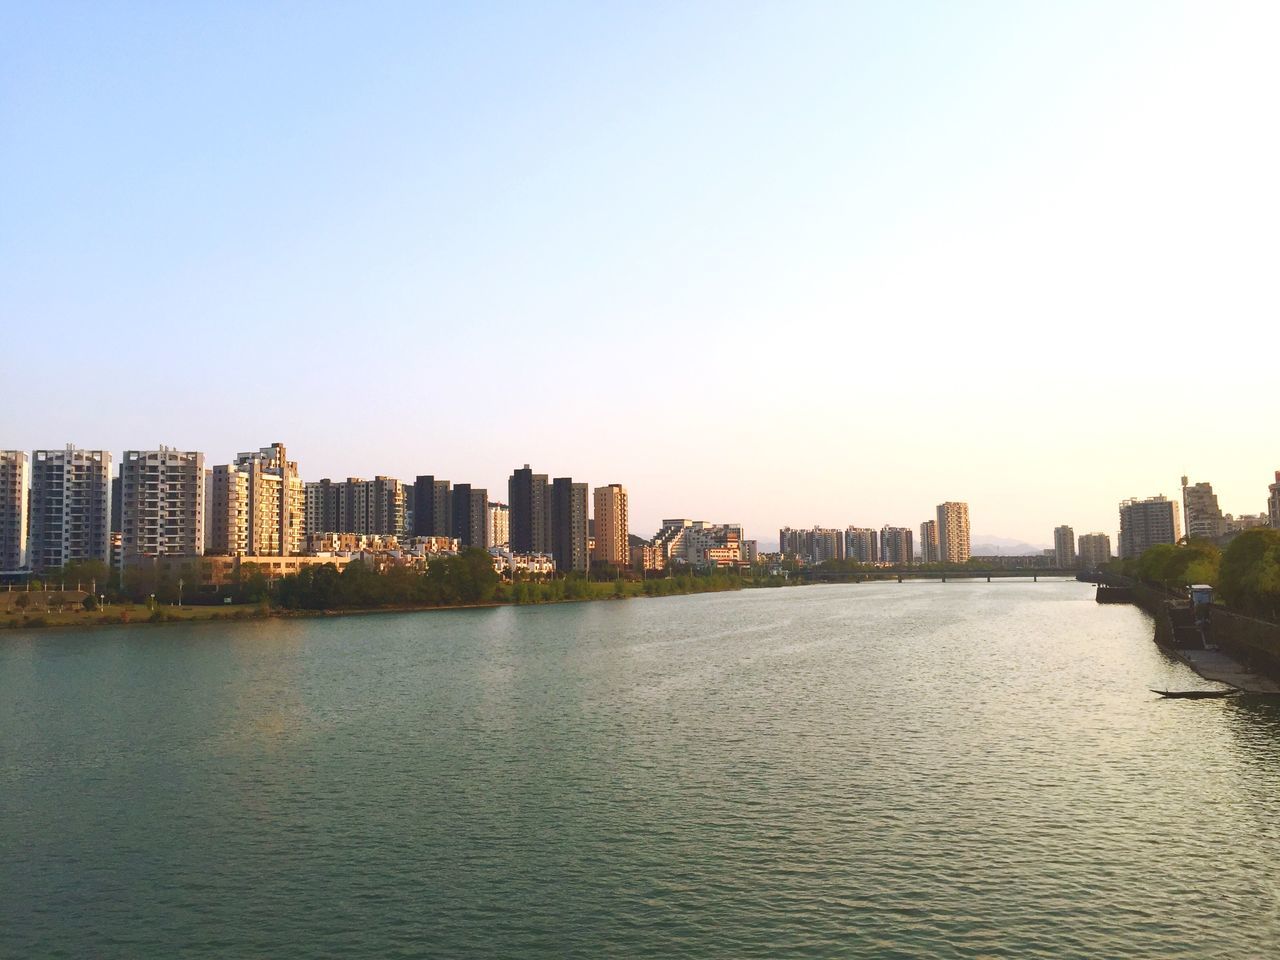 building exterior, architecture, waterfront, built structure, water, city, clear sky, copy space, cityscape, river, rippled, urban skyline, skyscraper, skyline, no people, building, outdoors, sky, mid distance, sunset